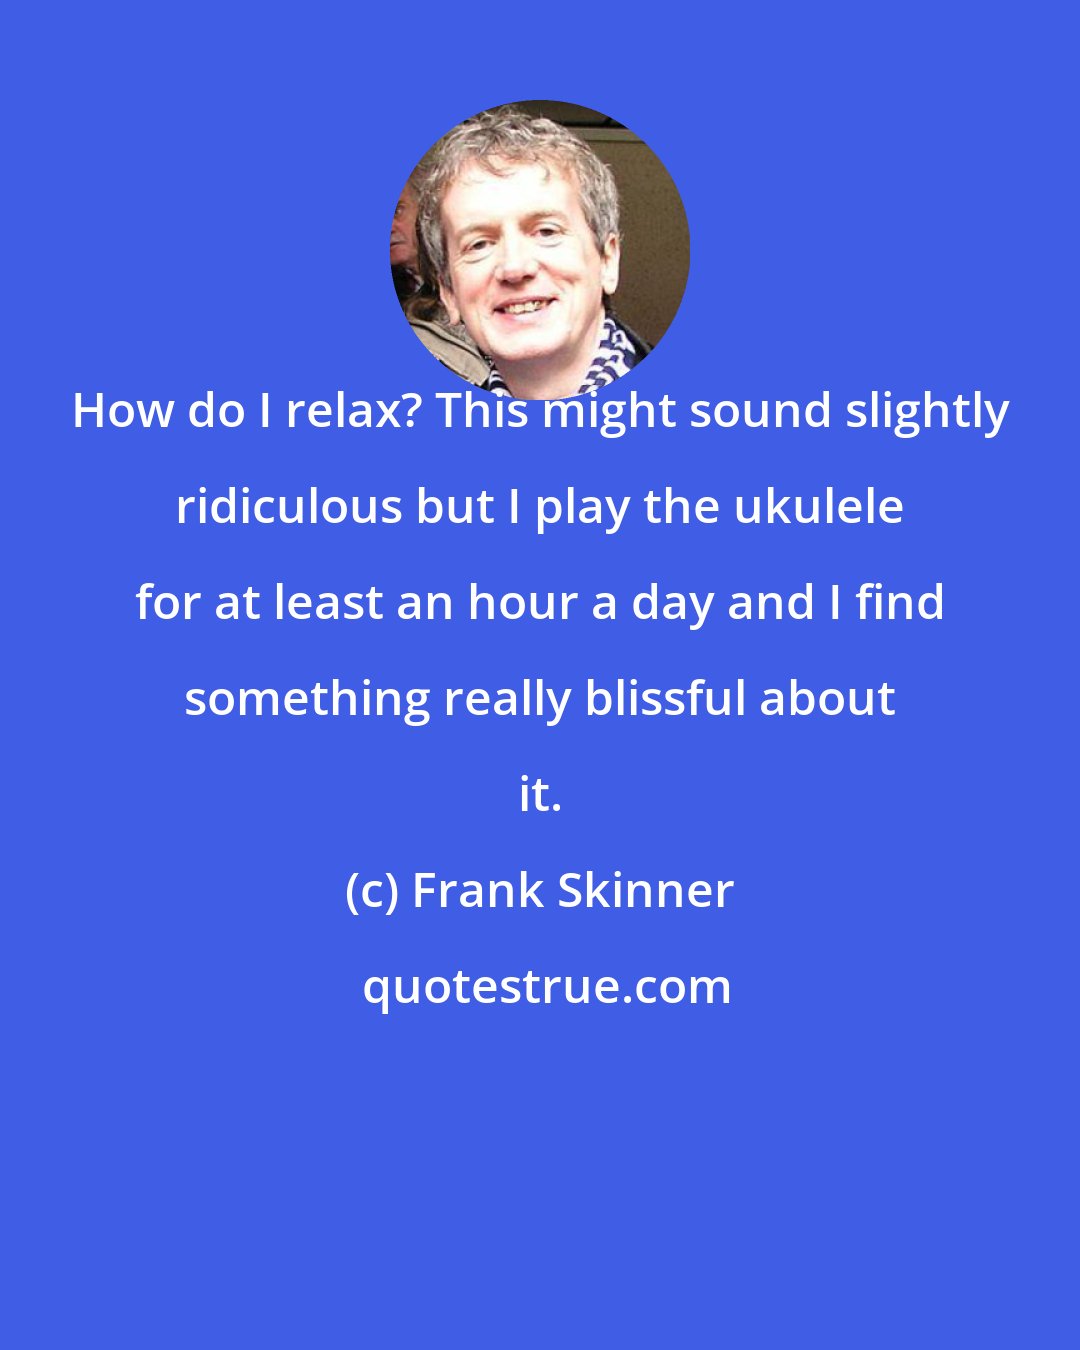 Frank Skinner: How do I relax? This might sound slightly ridiculous but I play the ukulele for at least an hour a day and I find something really blissful about it.